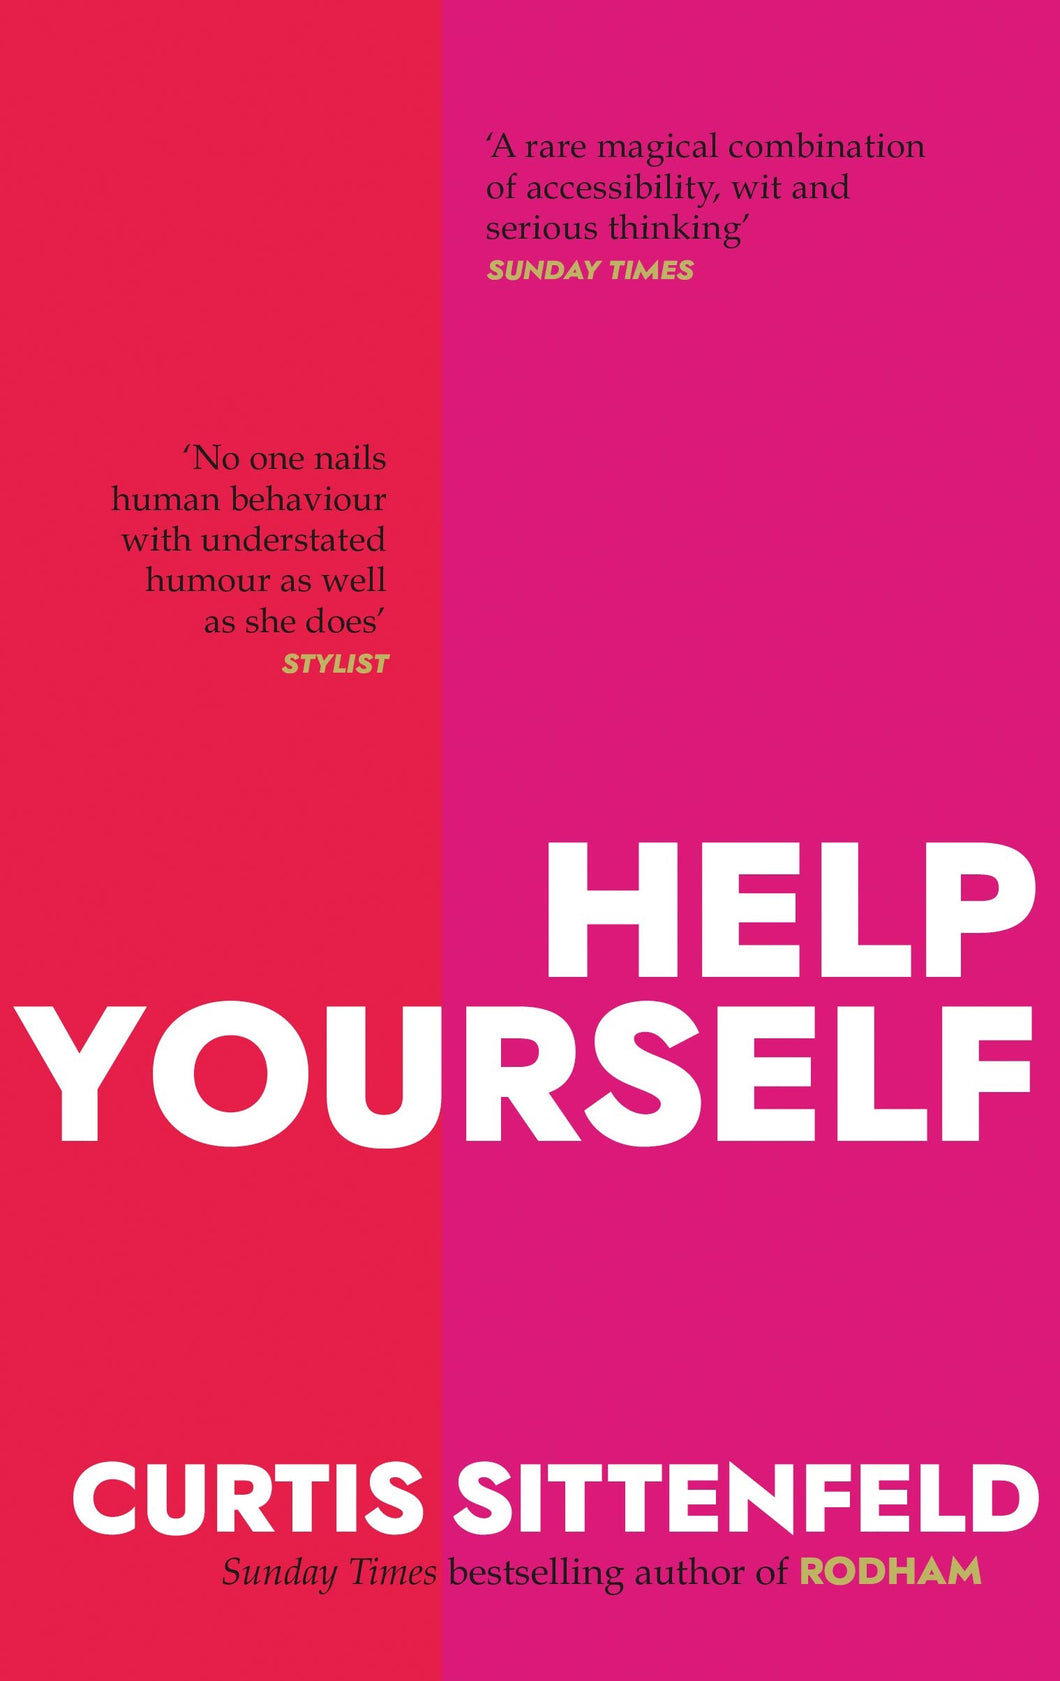 Help Yourself - Curtis Sittenfeld